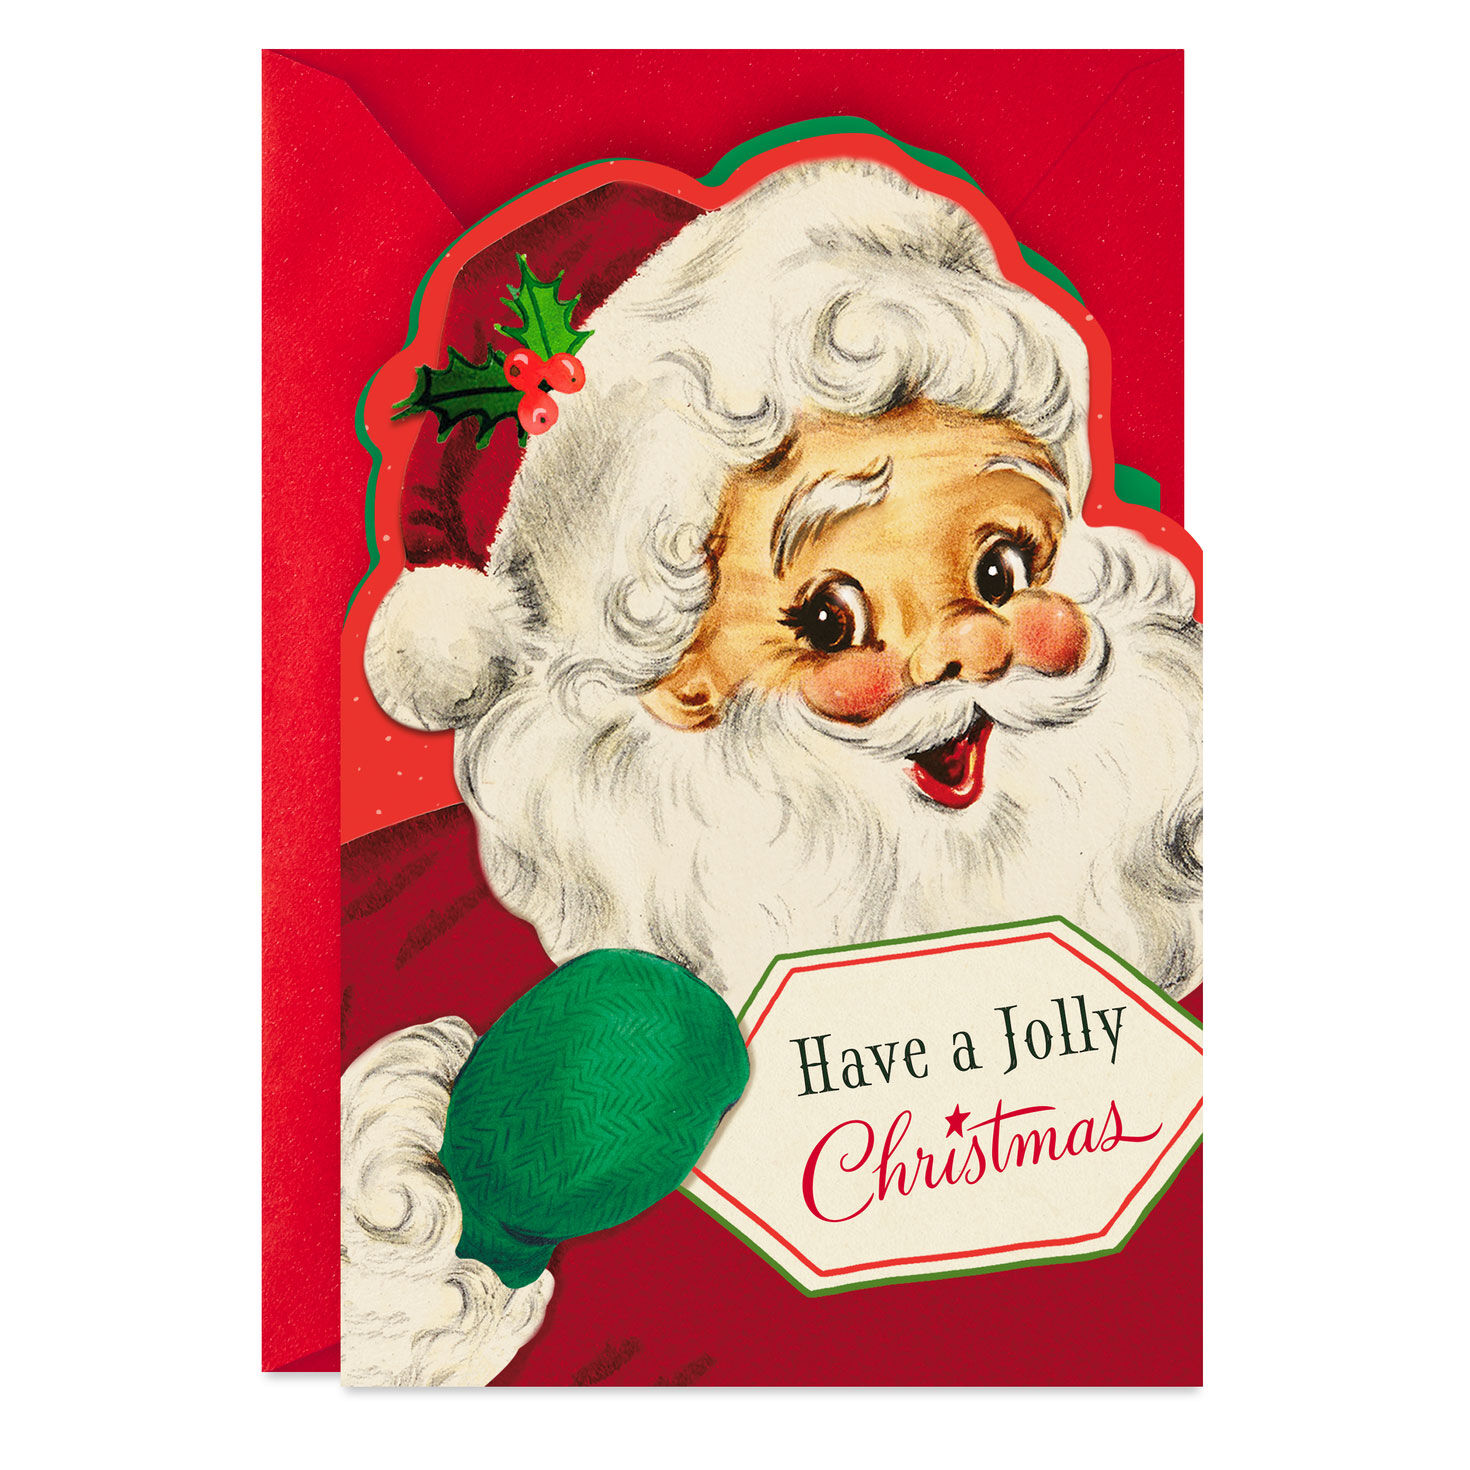 Details about   NEW 14 Countt Vintage Santa Claus CHRISTMAS CARDS w/Envelopes Glitter 5" x 7" 